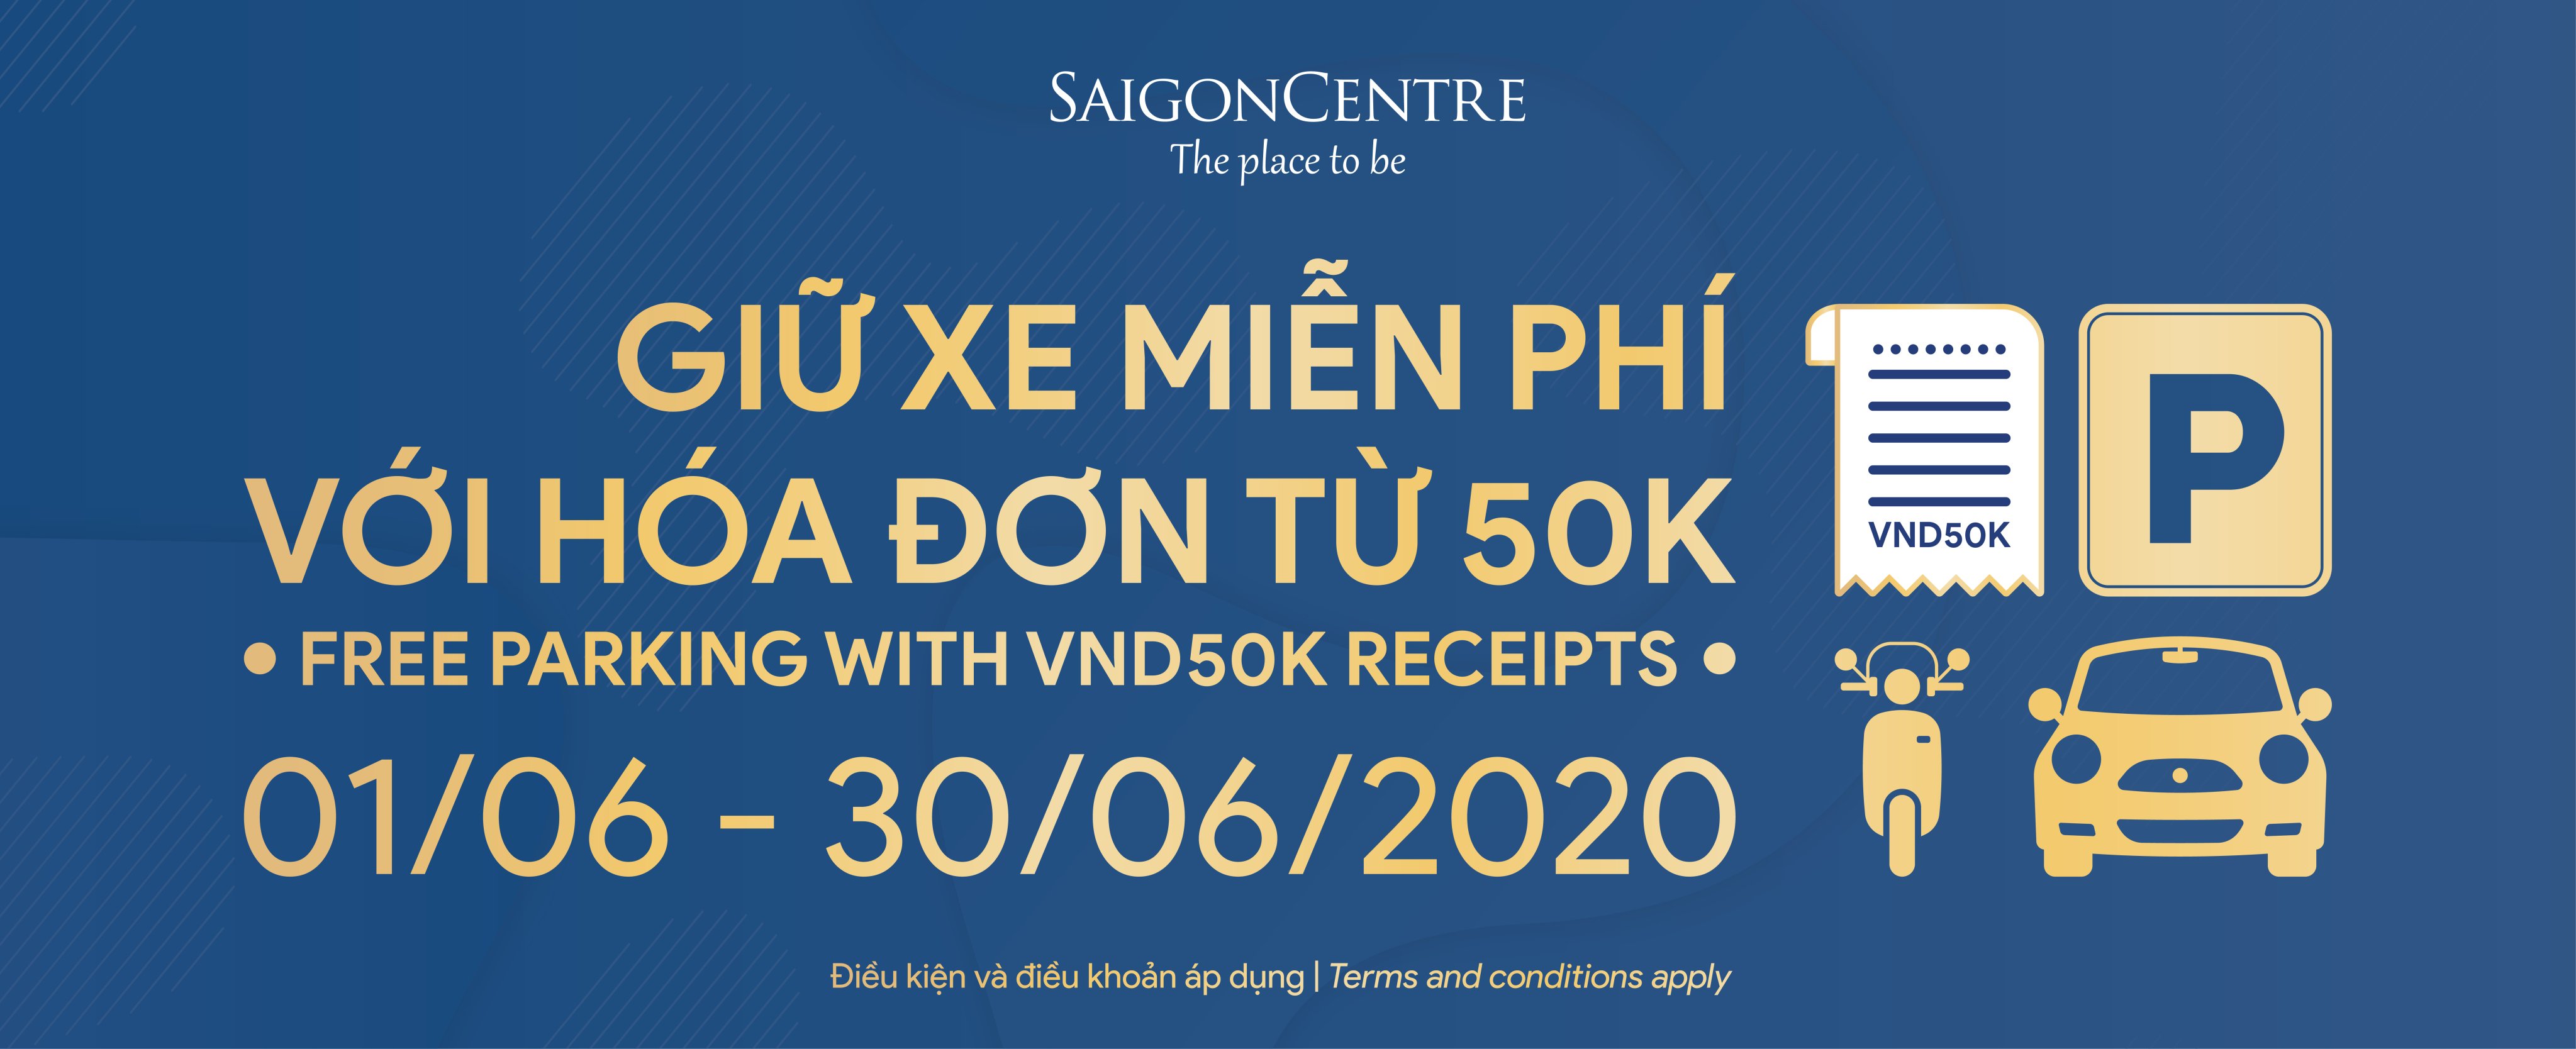 FREE PARKING WITH VND50K RECEIPTS FROM 01 - 30/06/2020